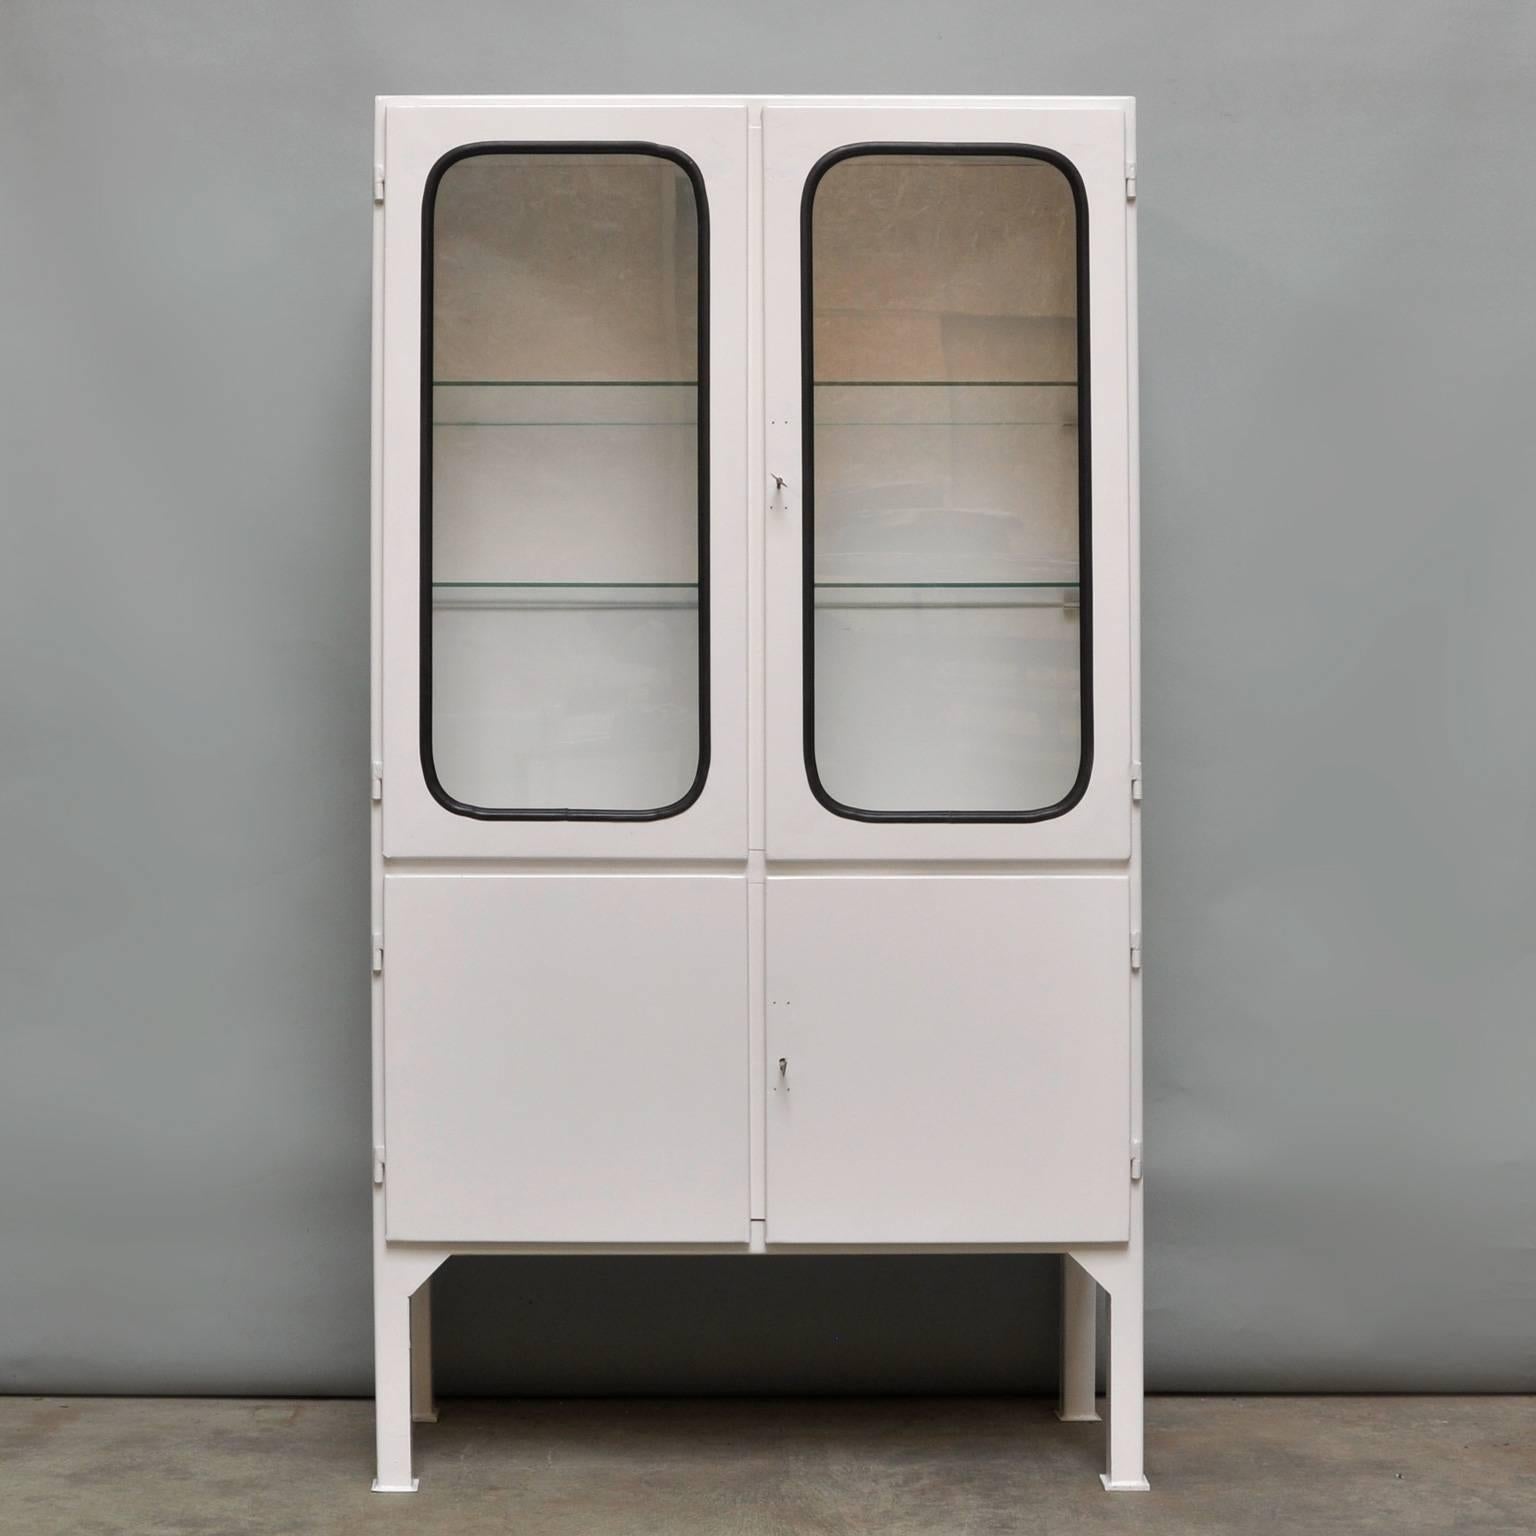 This medicine cabinet was designed in the 1970s and was produced circa 1975 in Hungary. It is made from iron and antique glass, and the glass is held by a black rubber strip. The cabinet features three (new) adjustable glass shelves and functioning